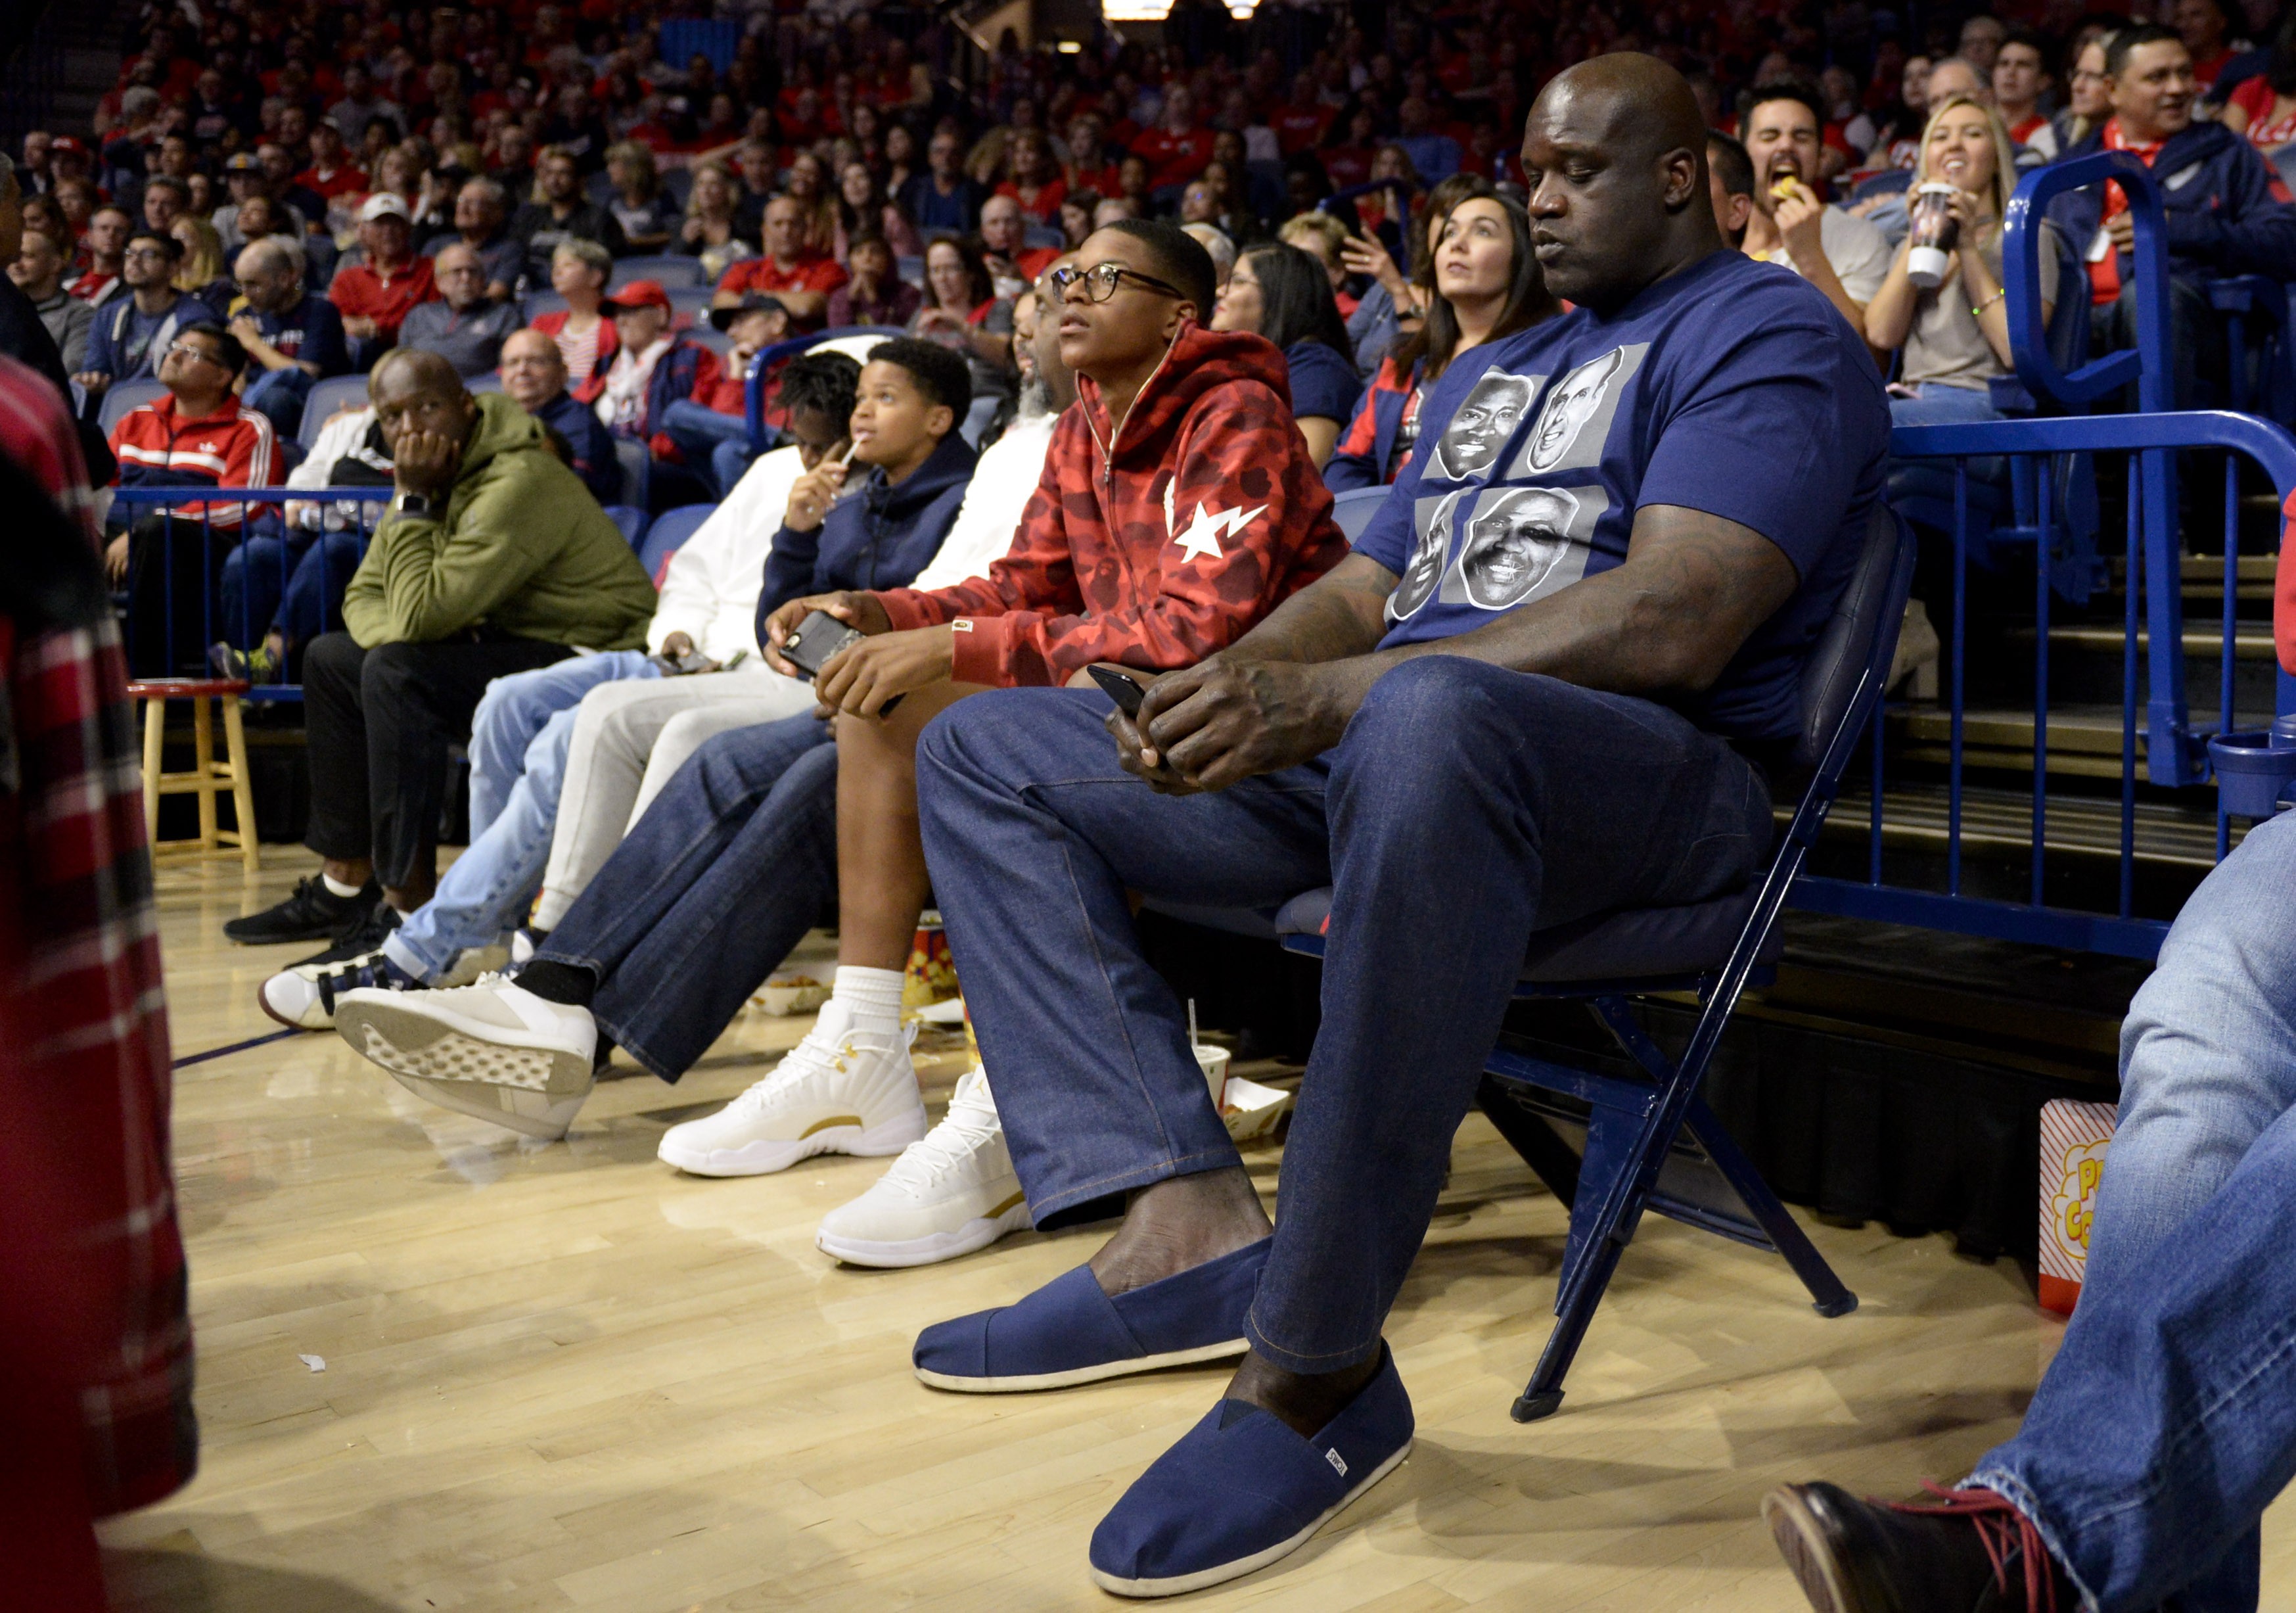 Shaq’s son Shareef O’Neal commits to Arizona and is getting noticed.